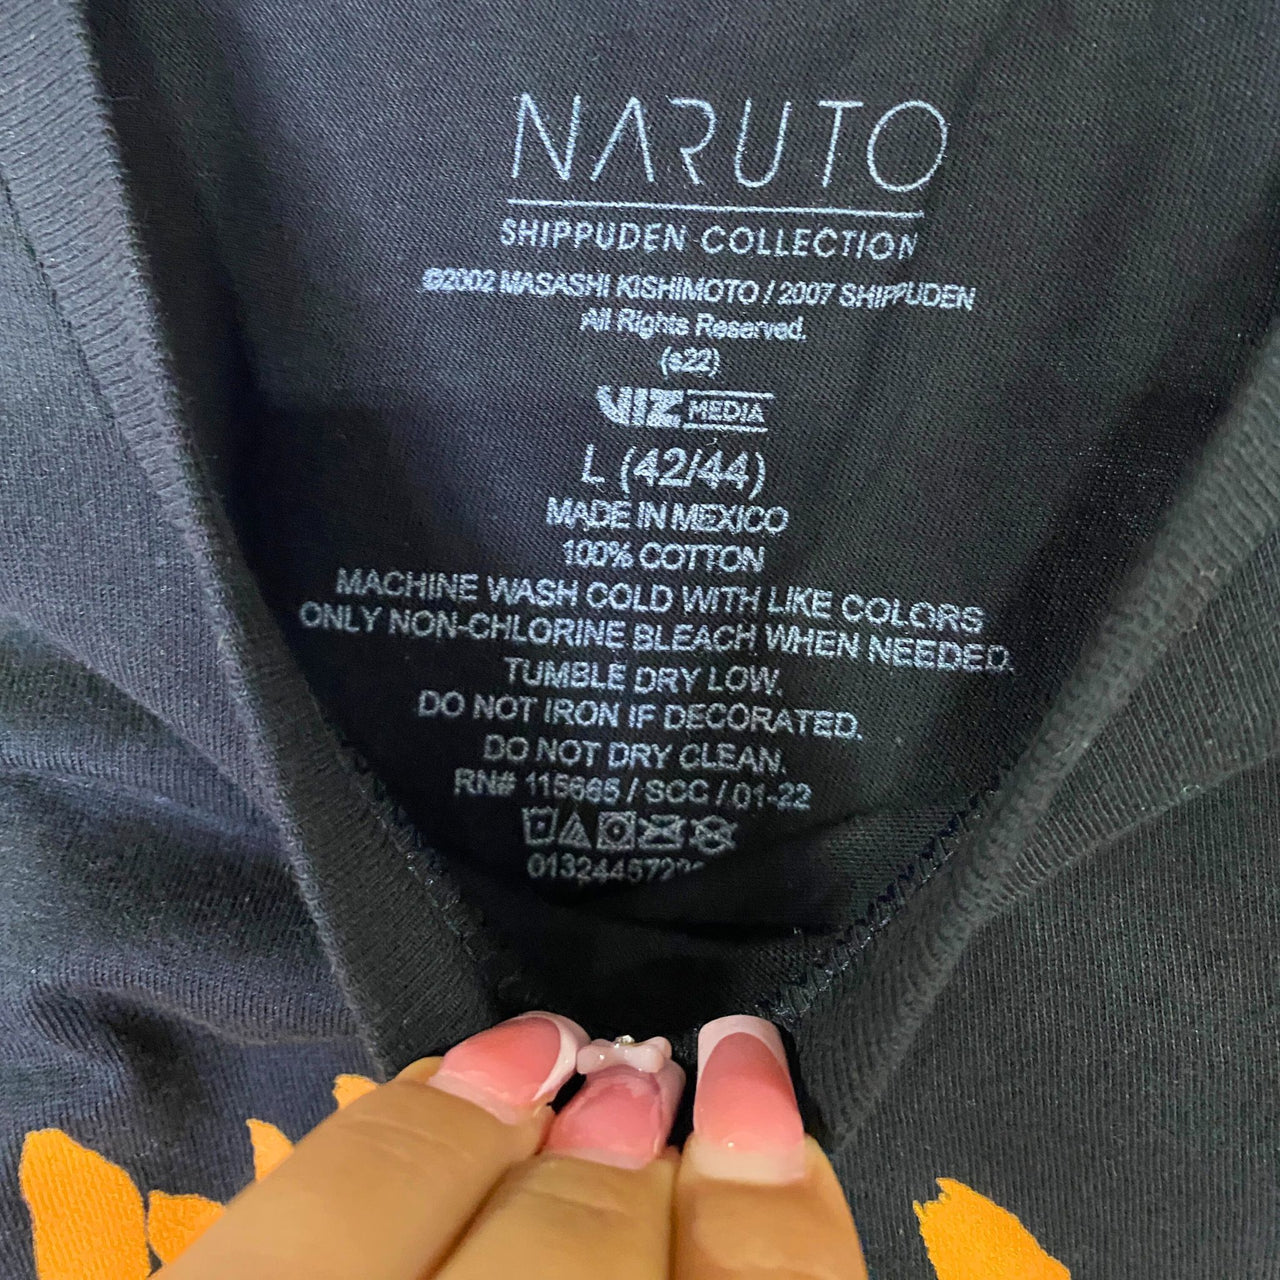 Naruto Shippuden Collection Size L 